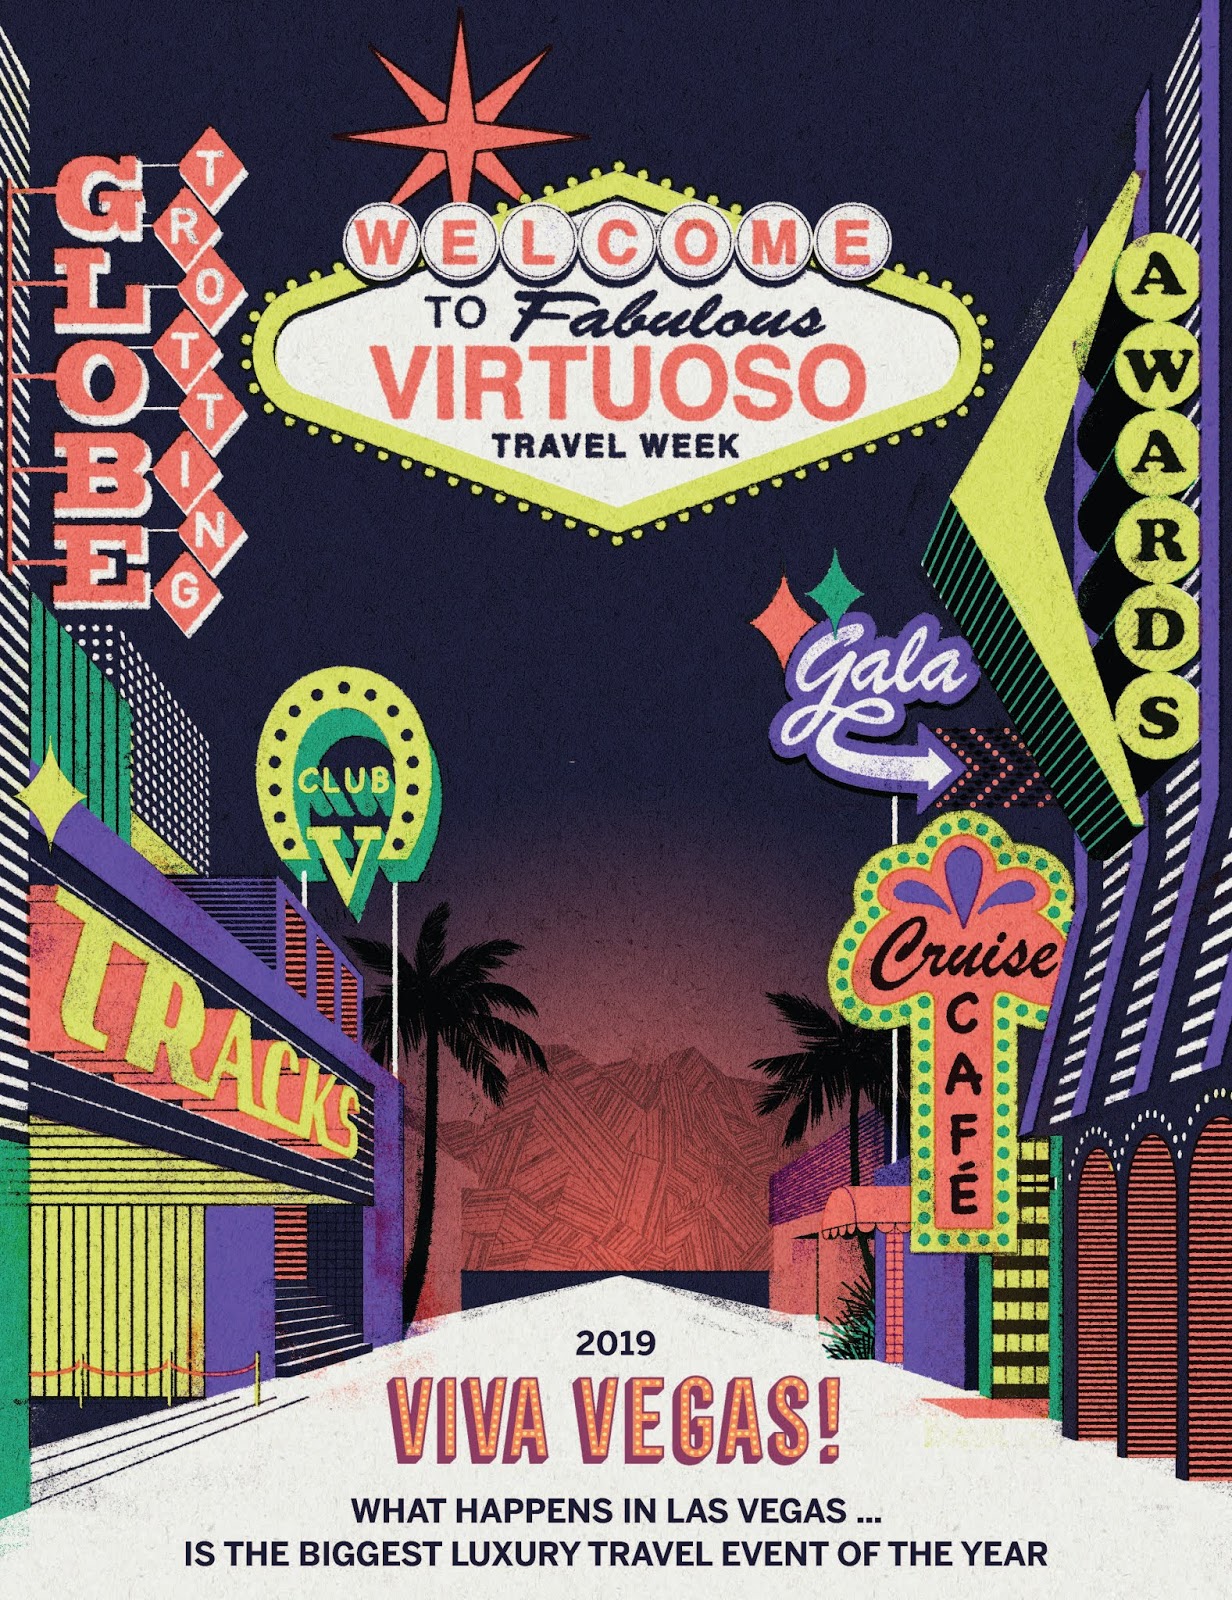 Virtuoso Travel Week in Las Vegas One of World's Greatest Travel Events